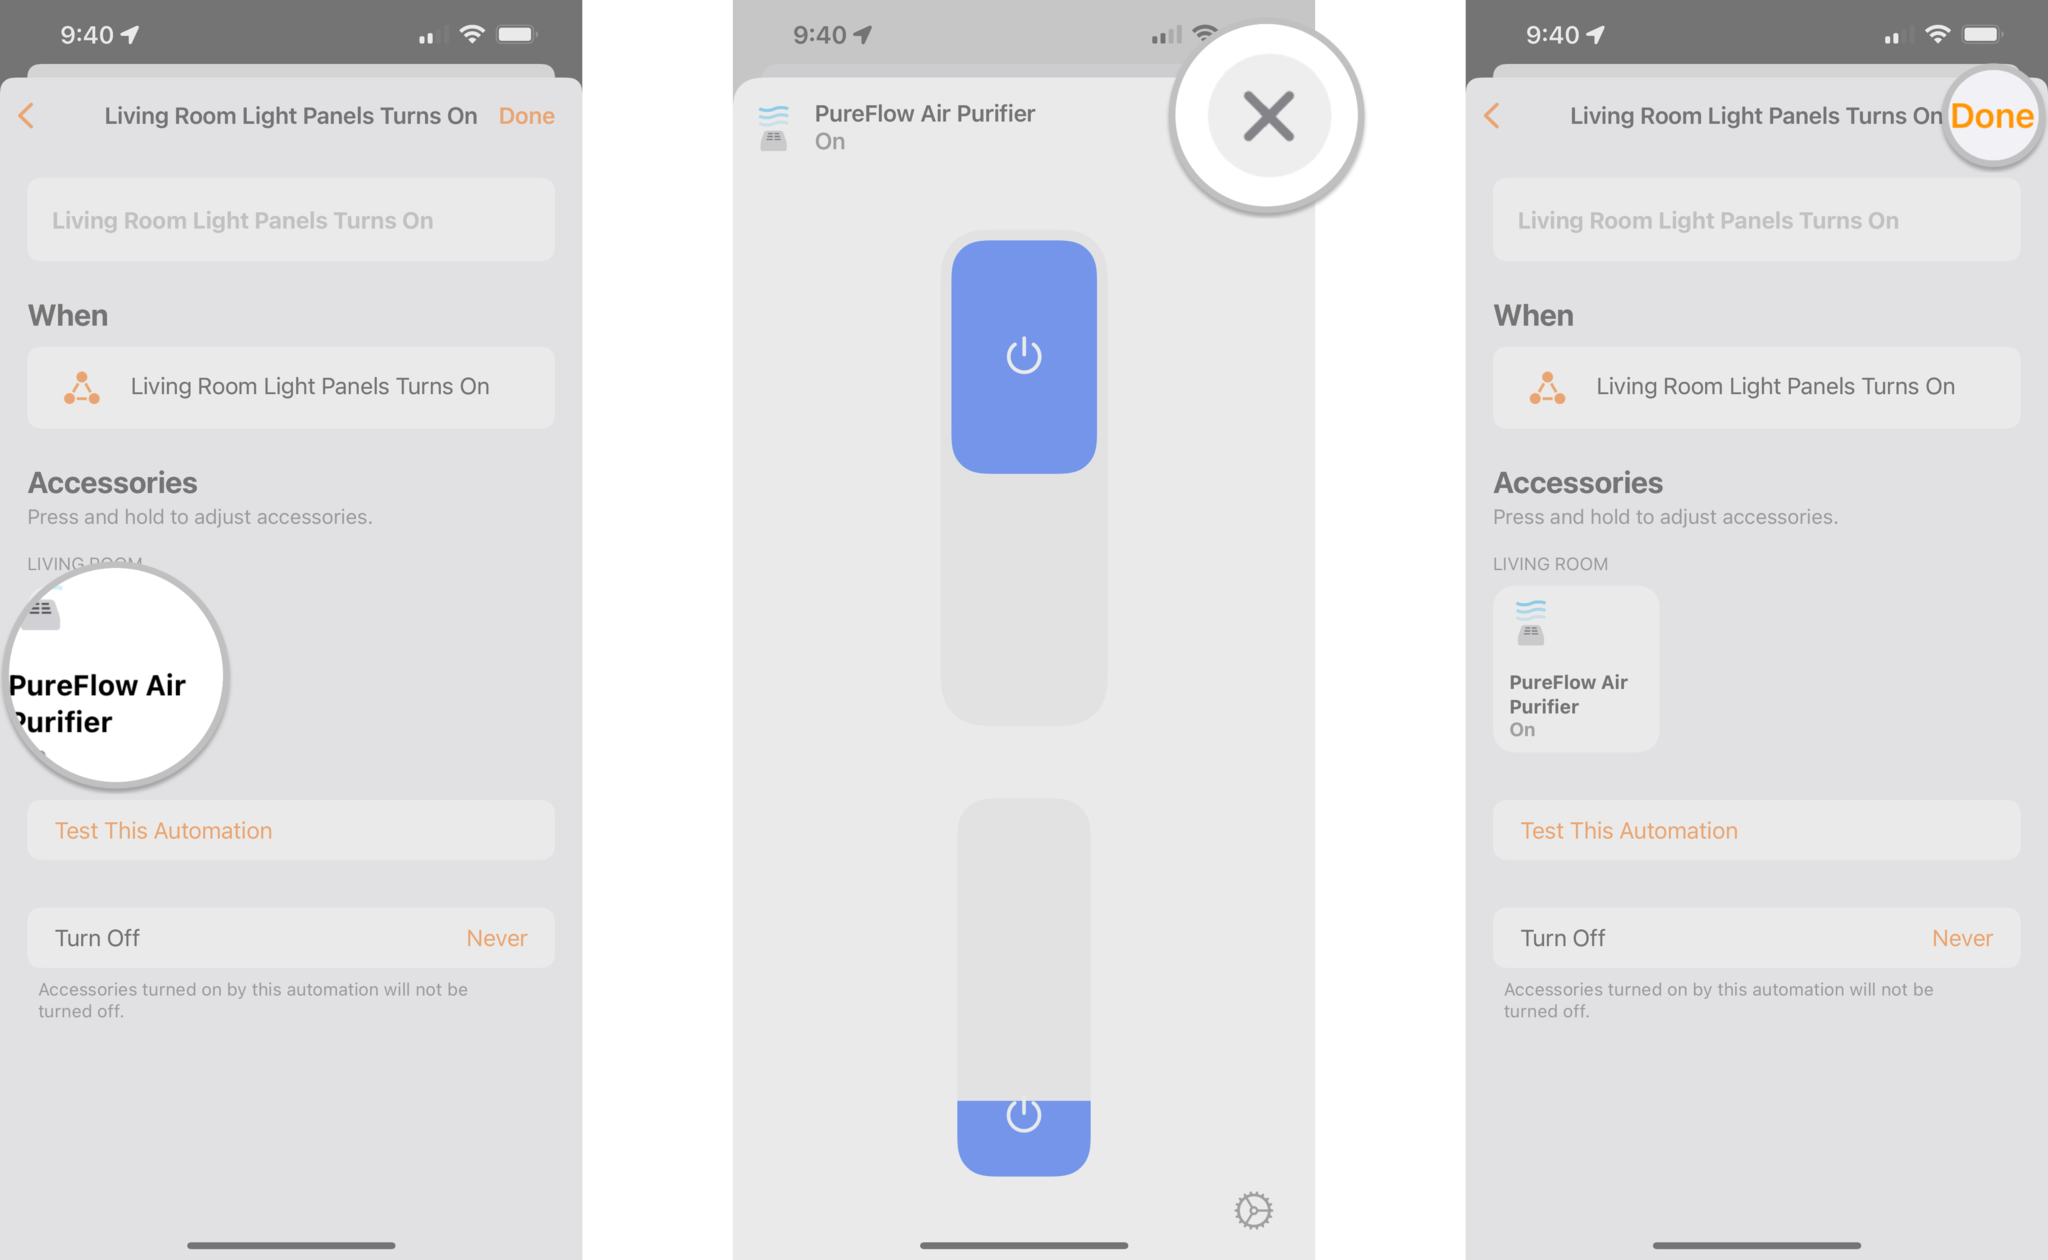 How to create an accessory automation in the Home app on the iPhone by showing steps: Tap and hold on an accessory to change state, Tap X after making adjustment, Tap Done